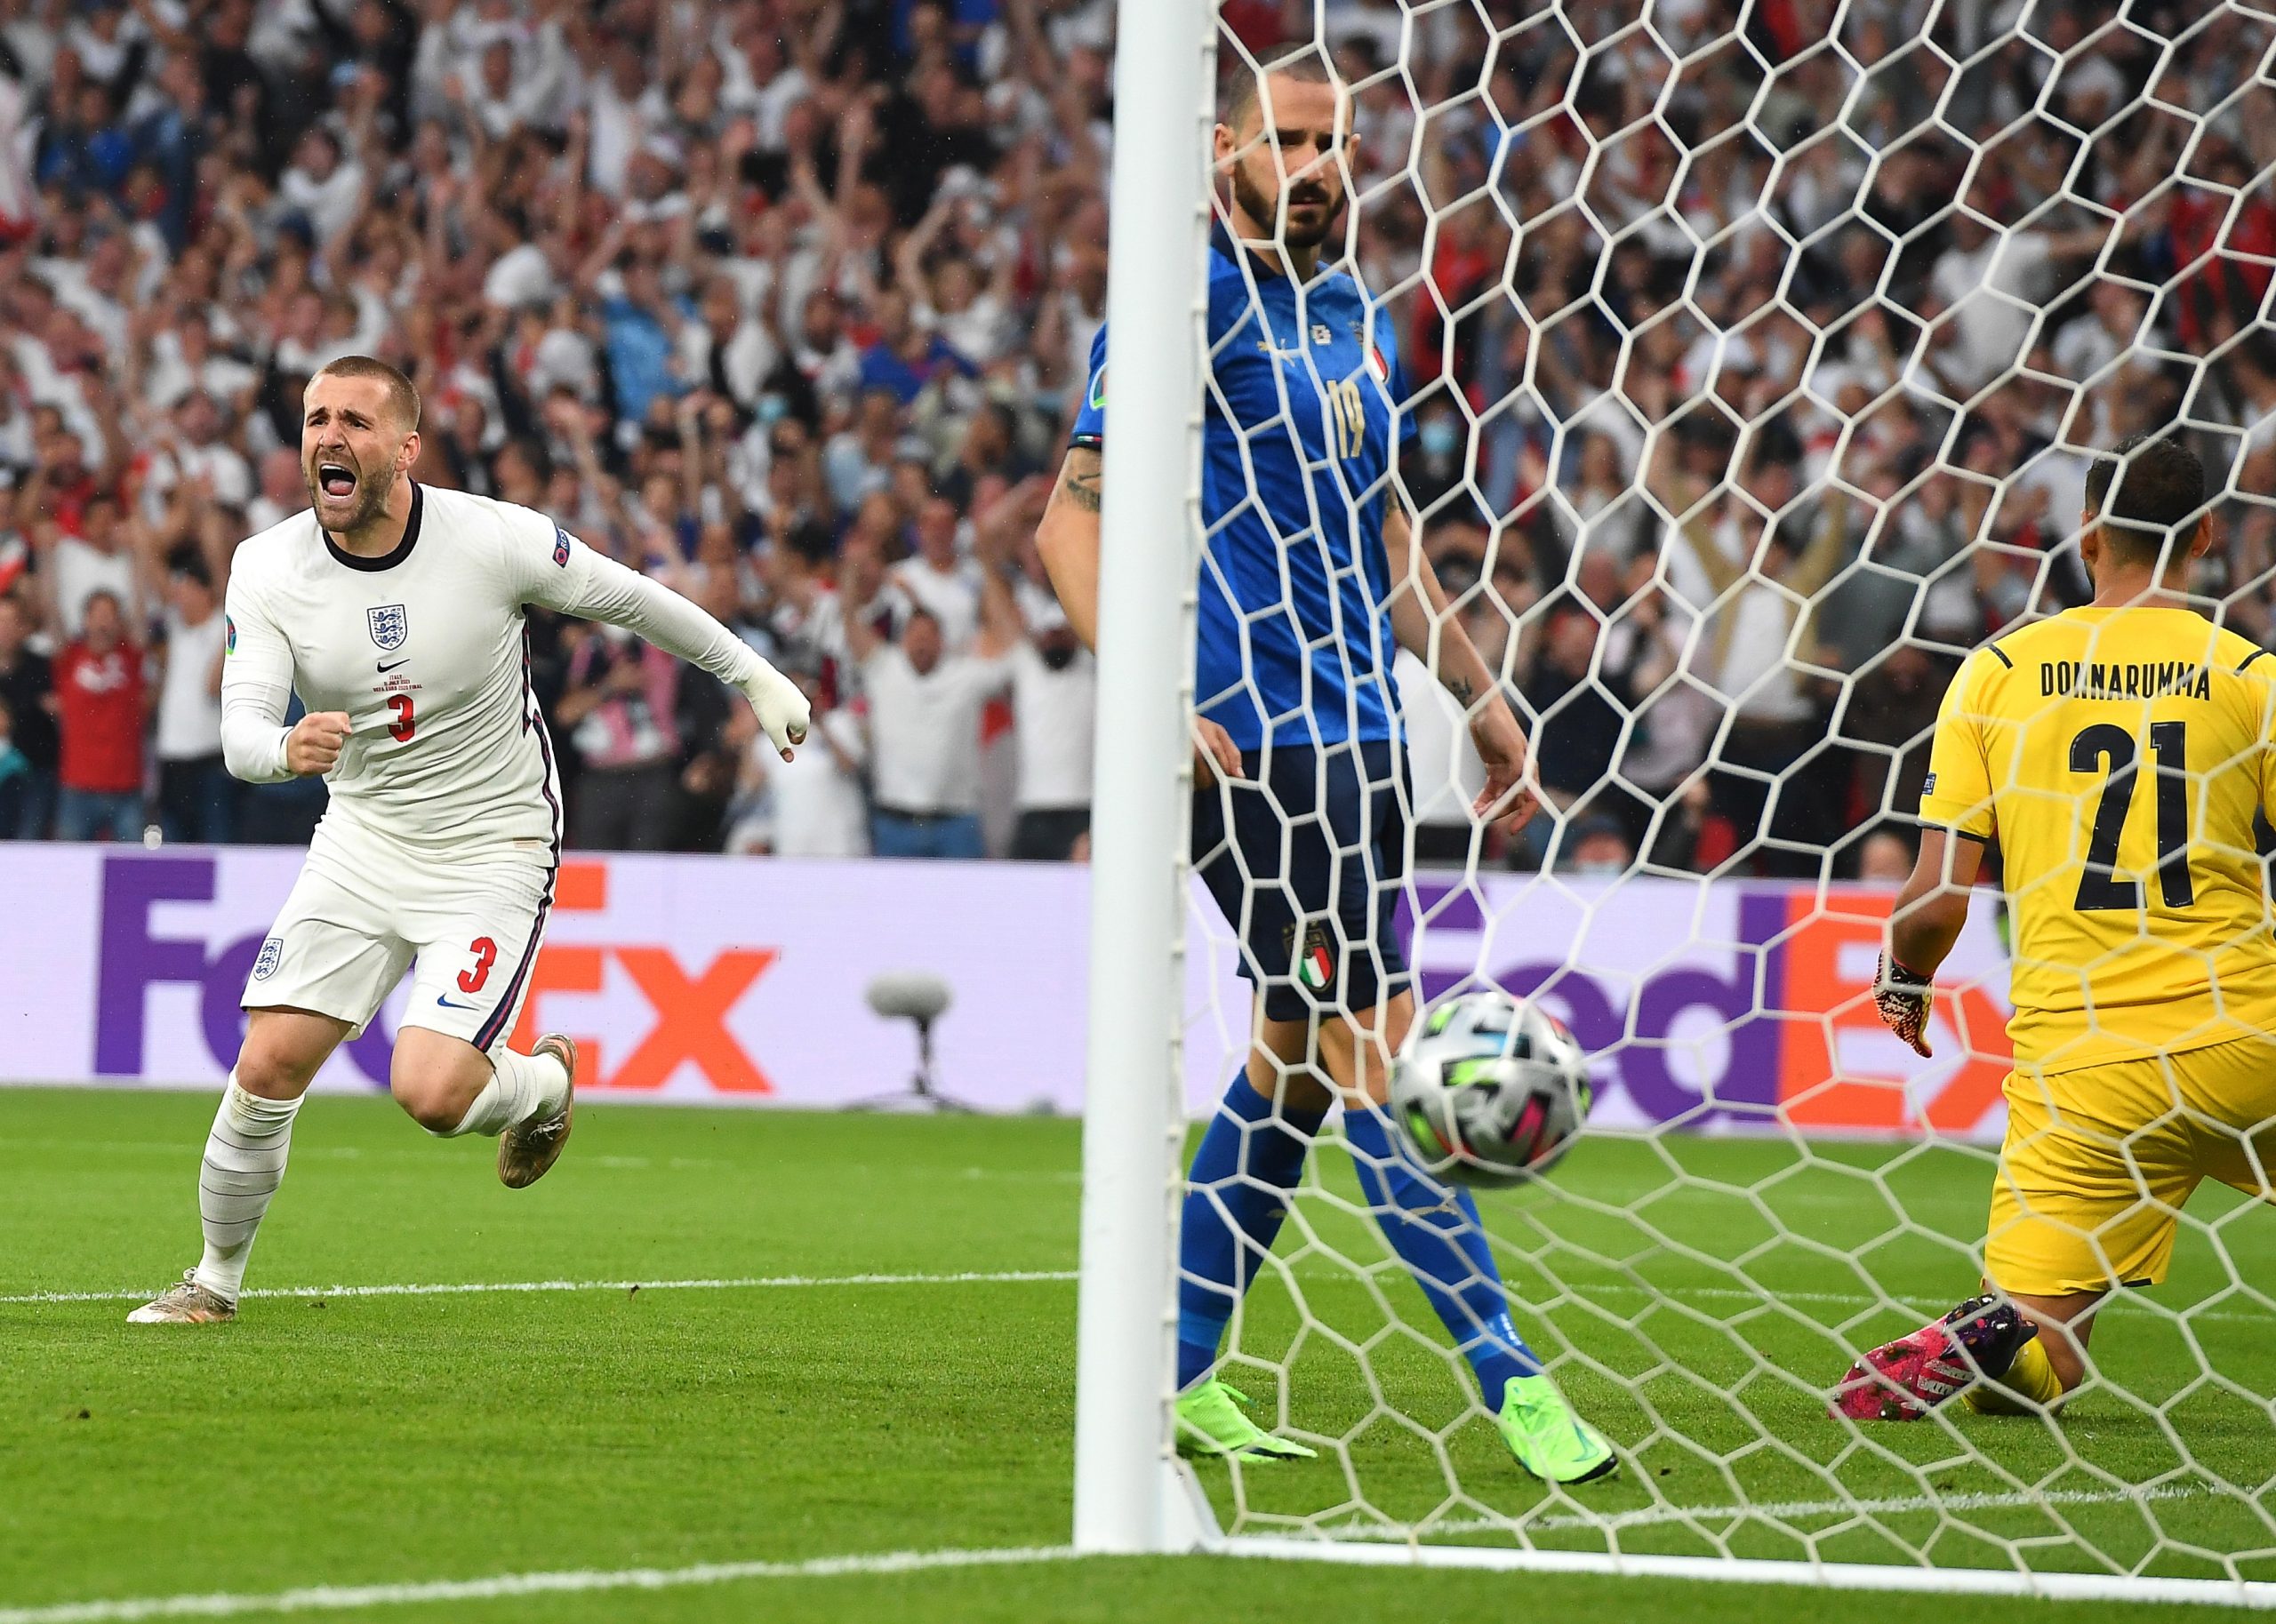 epa09338271 Luke Shaw (L) of England celebrates after scoring the 1-0 lead during the UEFA EURO 2020 final between Italy and England in London, Britain, 11 July 2021.  EPA/Andy Rain / POOL (RESTRICTIONS: For editorial news reporting purposes only. Images must appear as still images and must not emulate match action video footage. Photographs published in online publications shall have an interval of at least 20 seconds between the posting.)